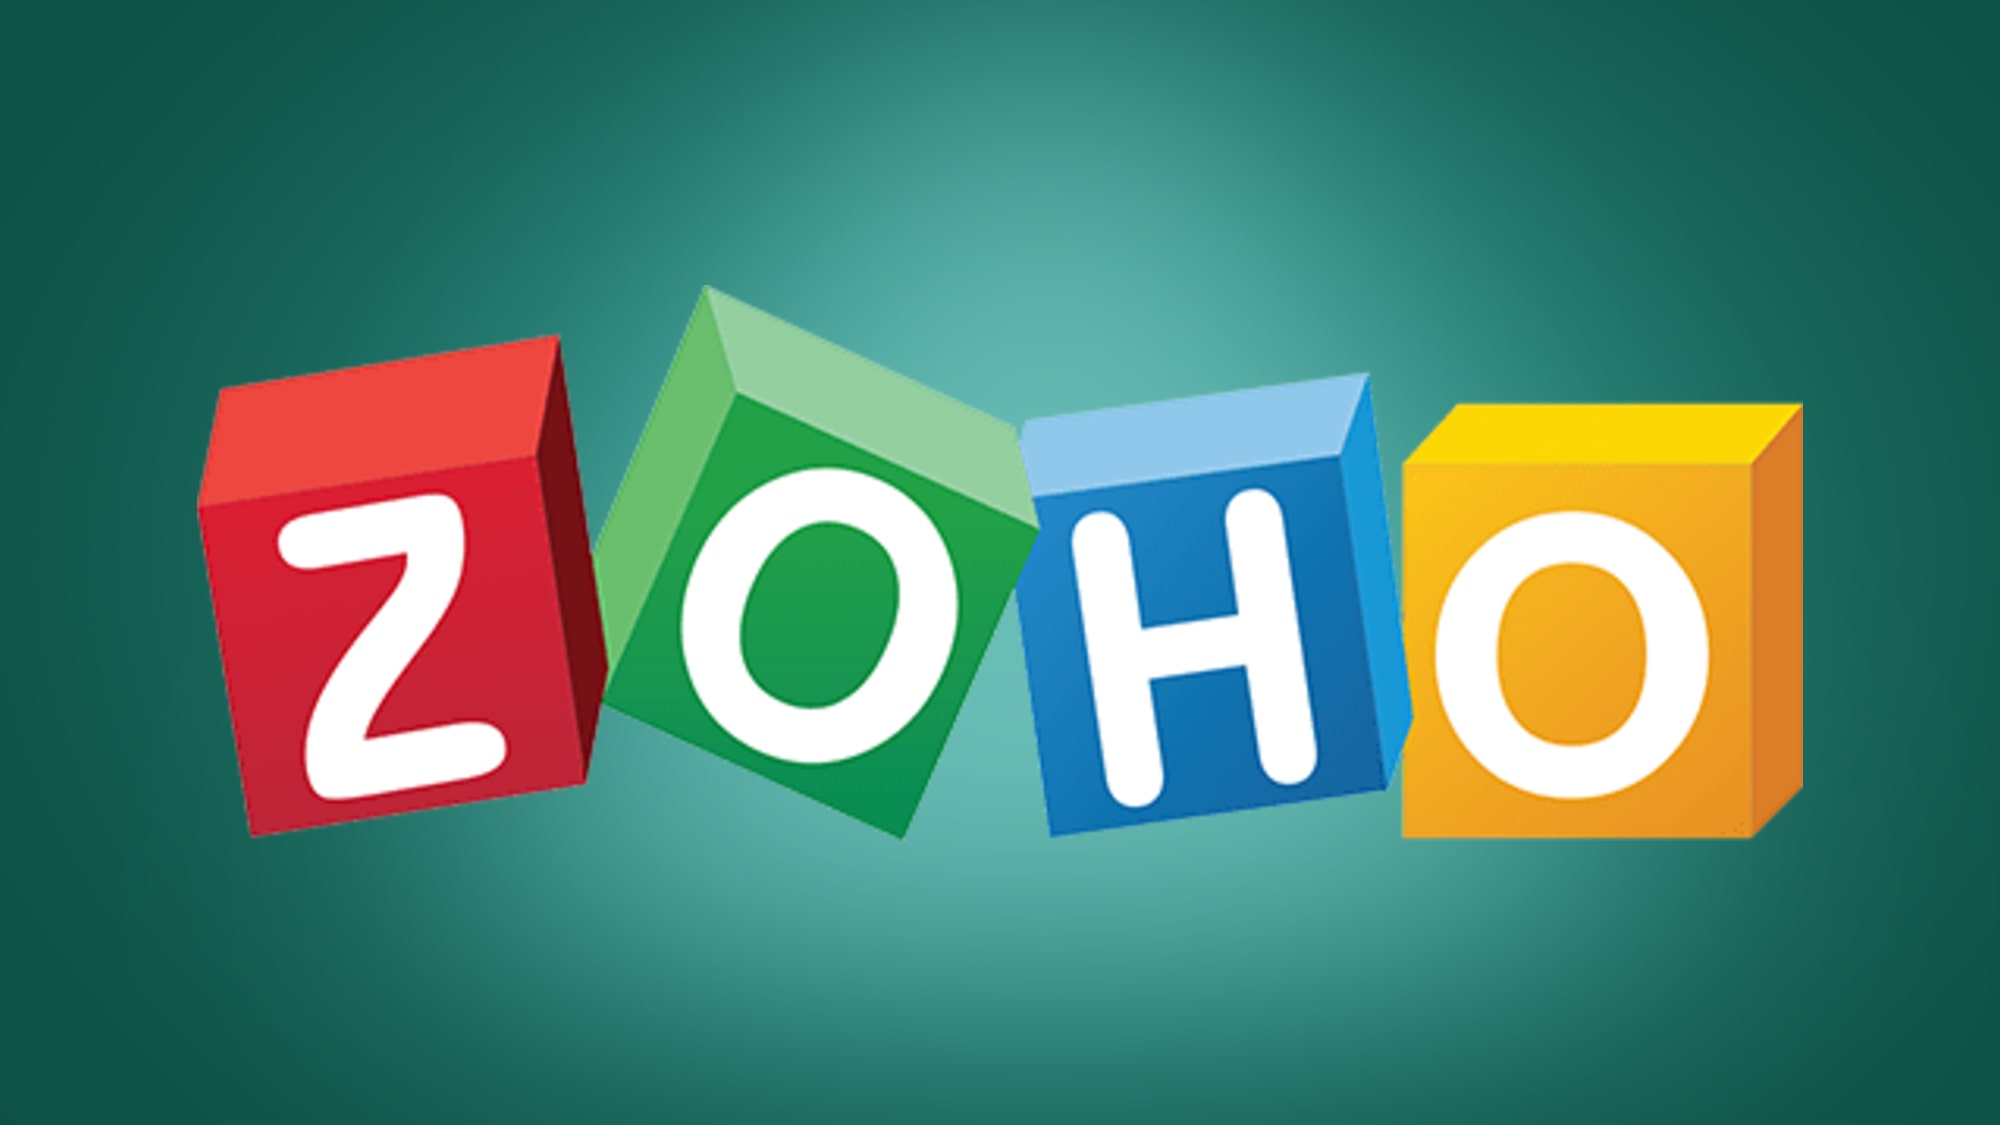 Zoho logo on green background with spotlight effect